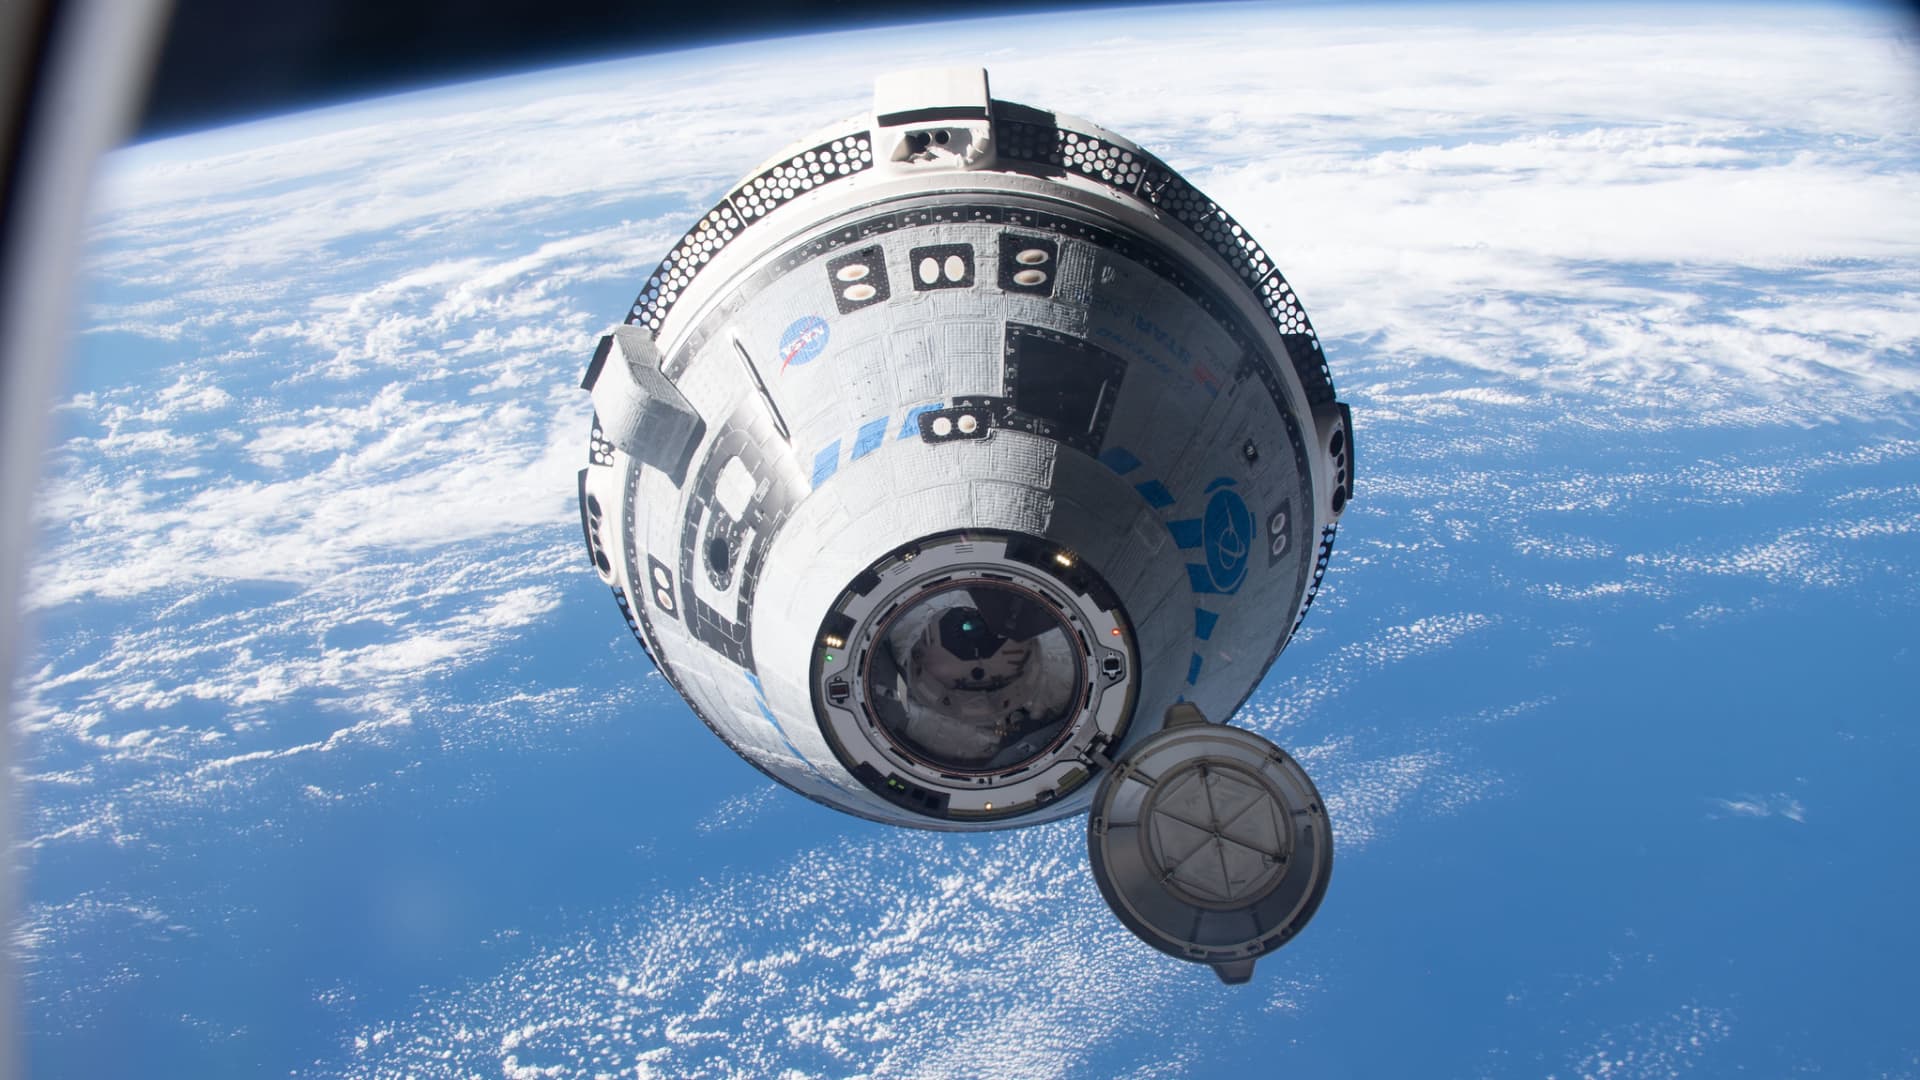 Boeing's Starliner spacecraft is seen before docking with the International Space Station on May 20, 2022 during the uncrewed OFT-2 mission.